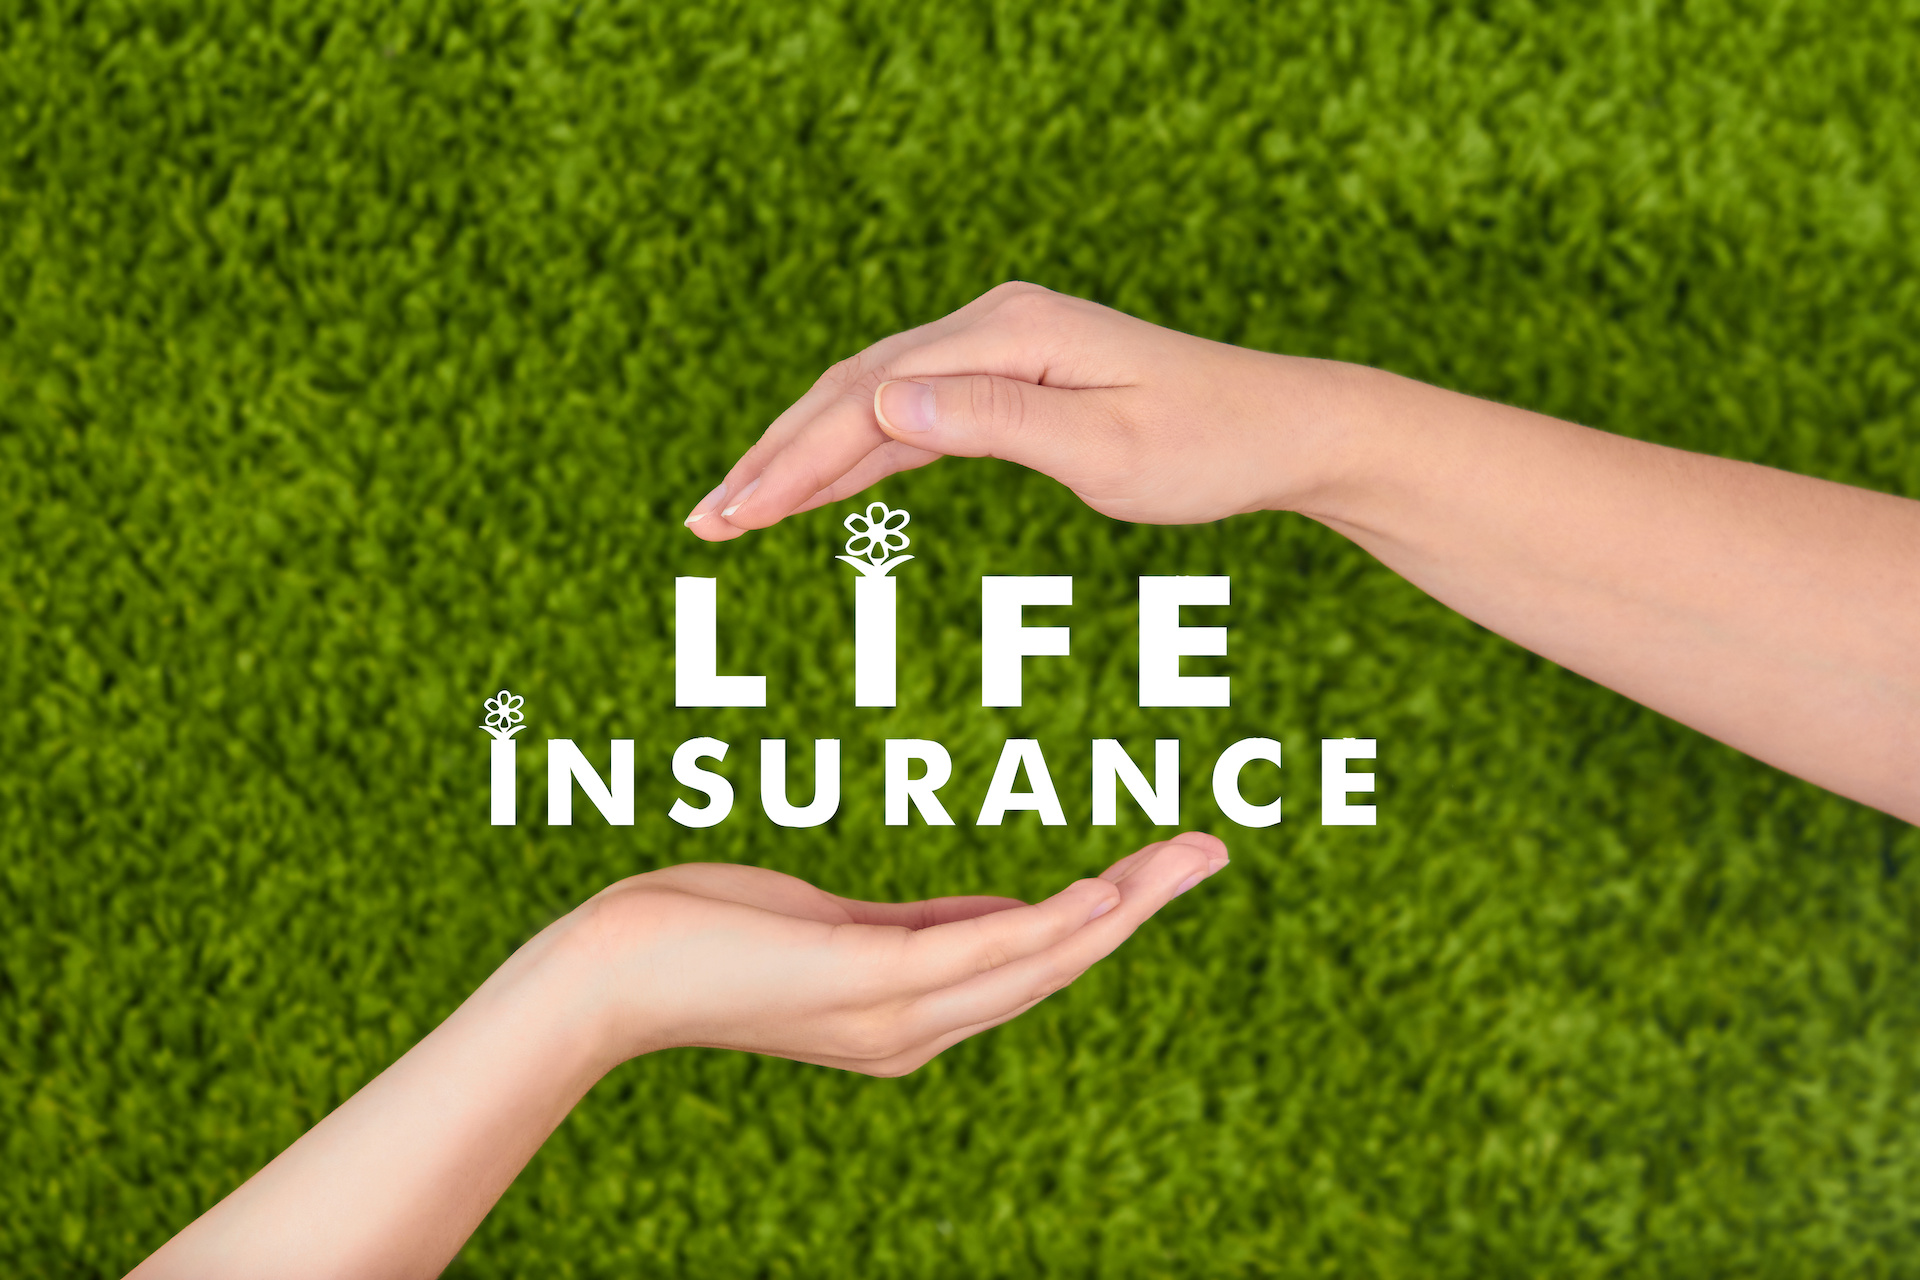 Joint life insurance can be the right choice for a family